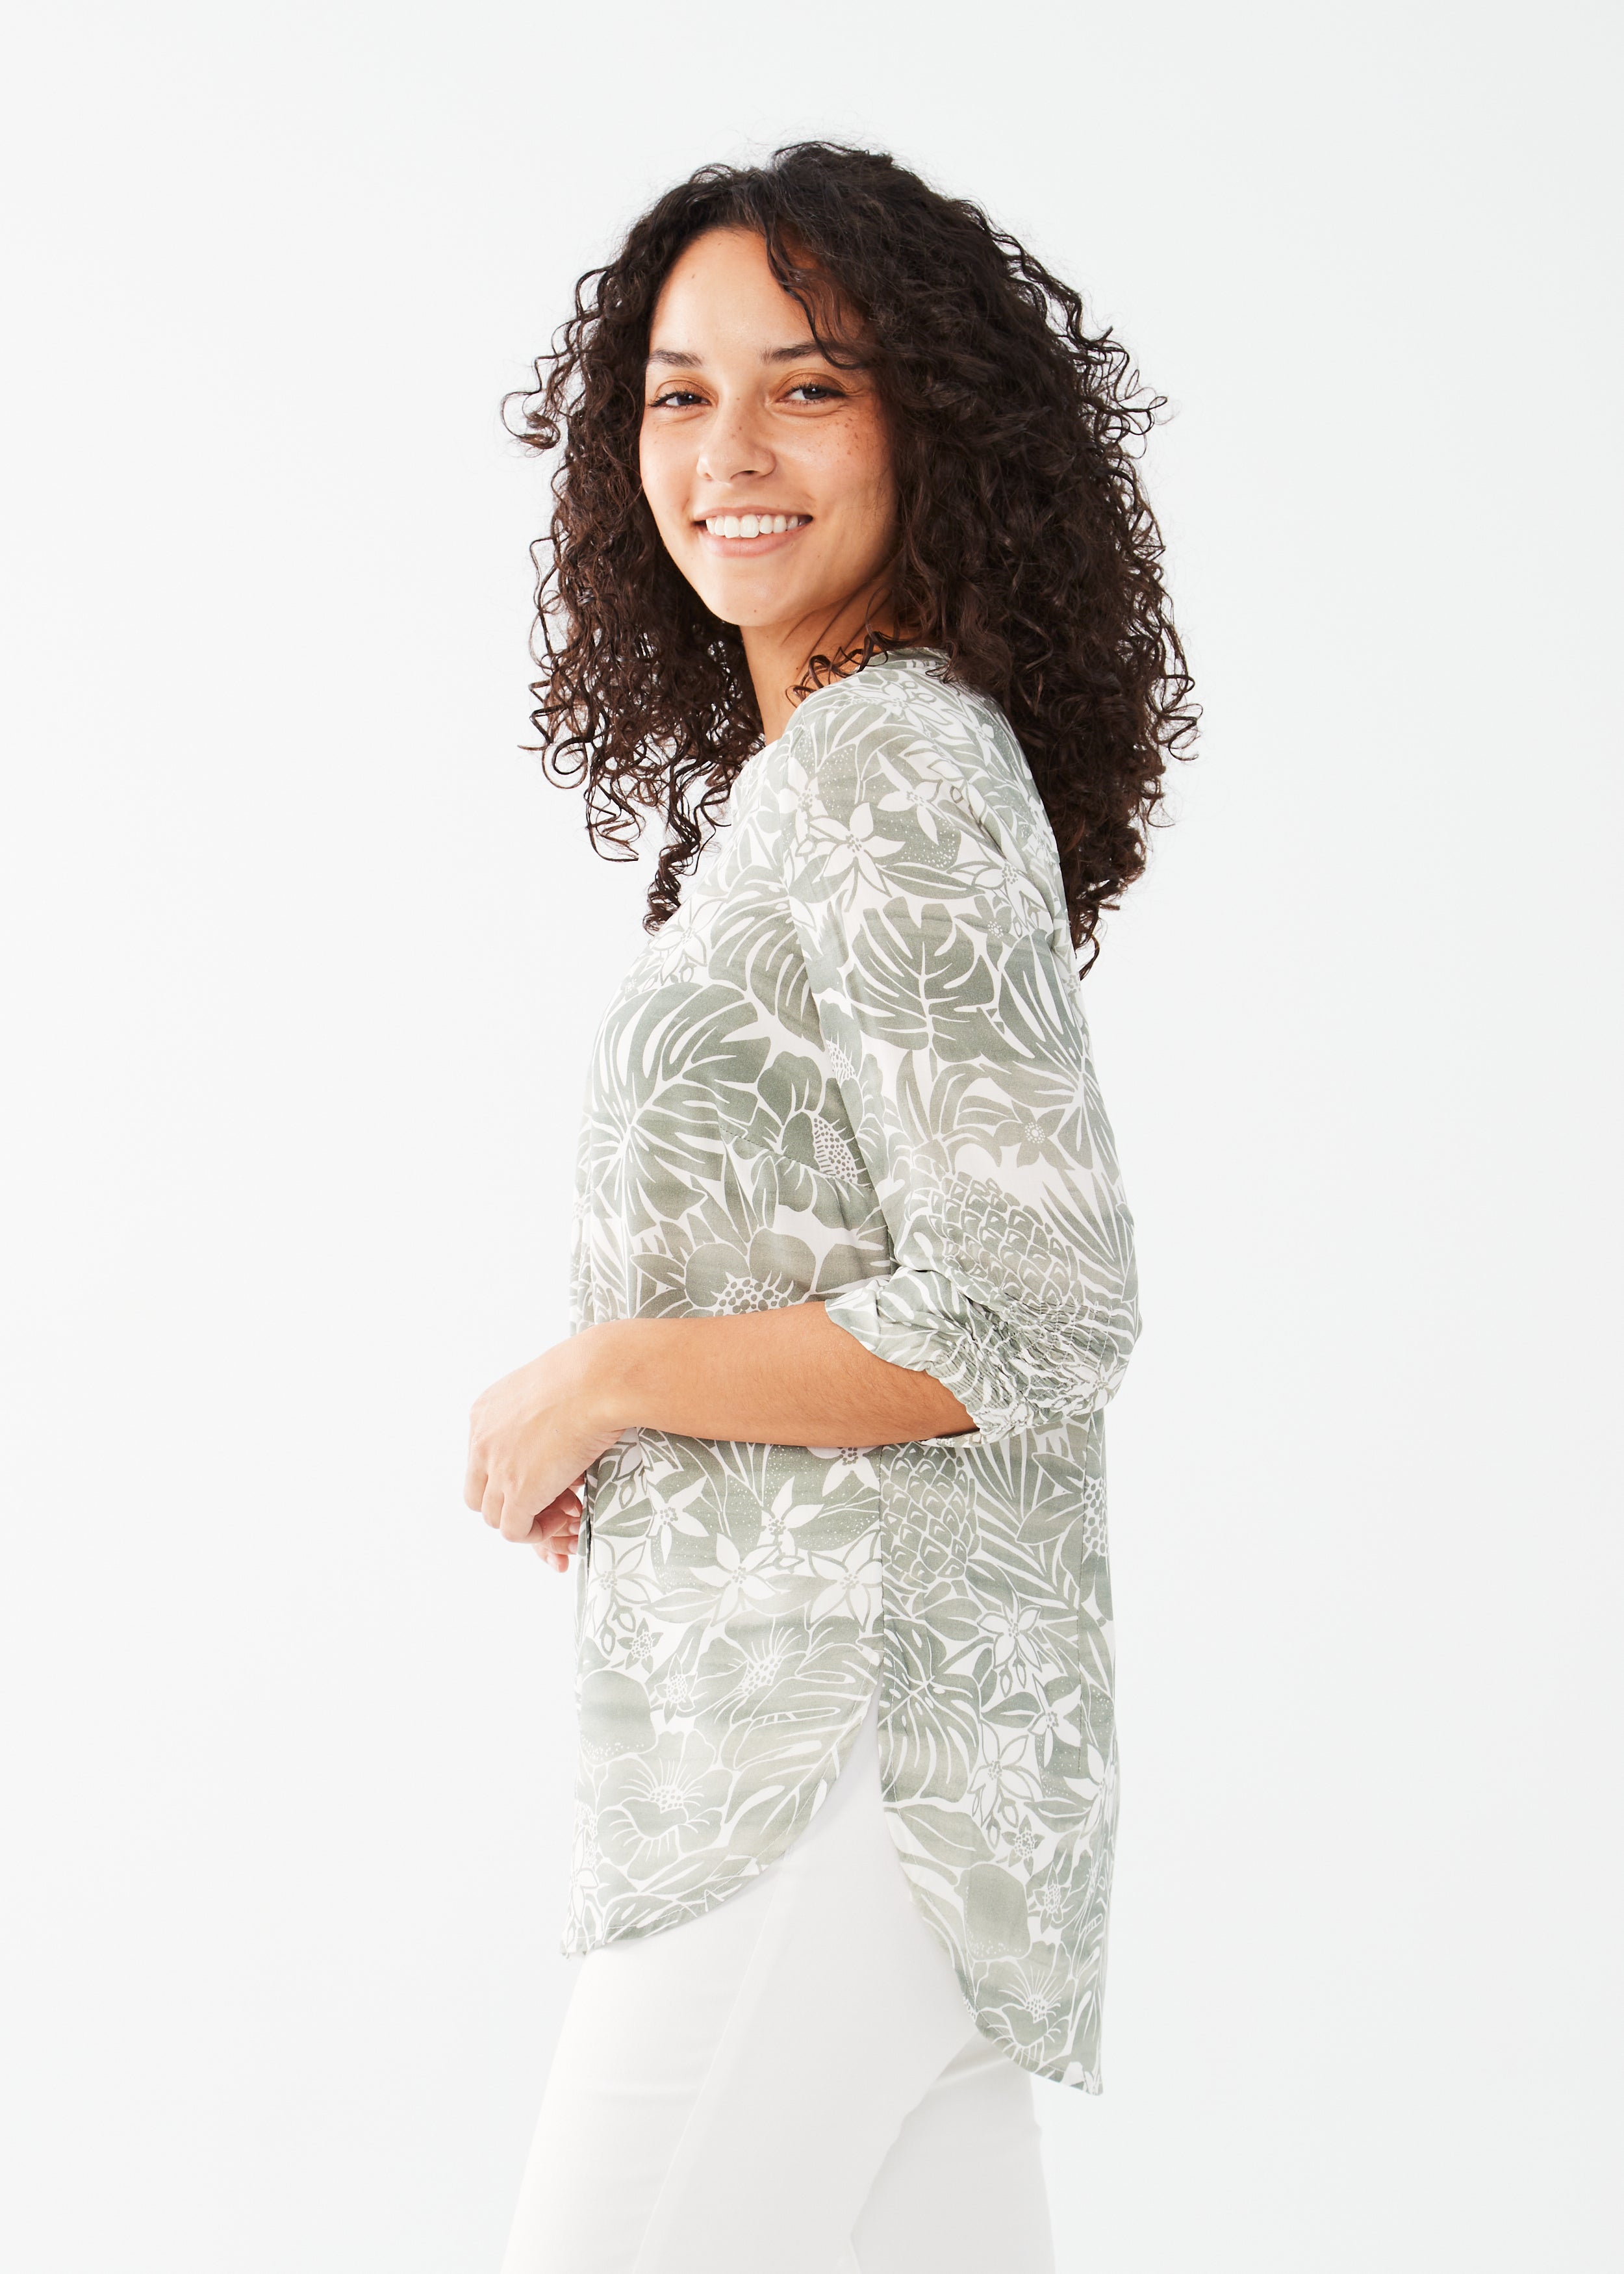 Elevate your wardrobe with our FDJ 3/4 Sleeve Shirt in a stunning tropical print. 